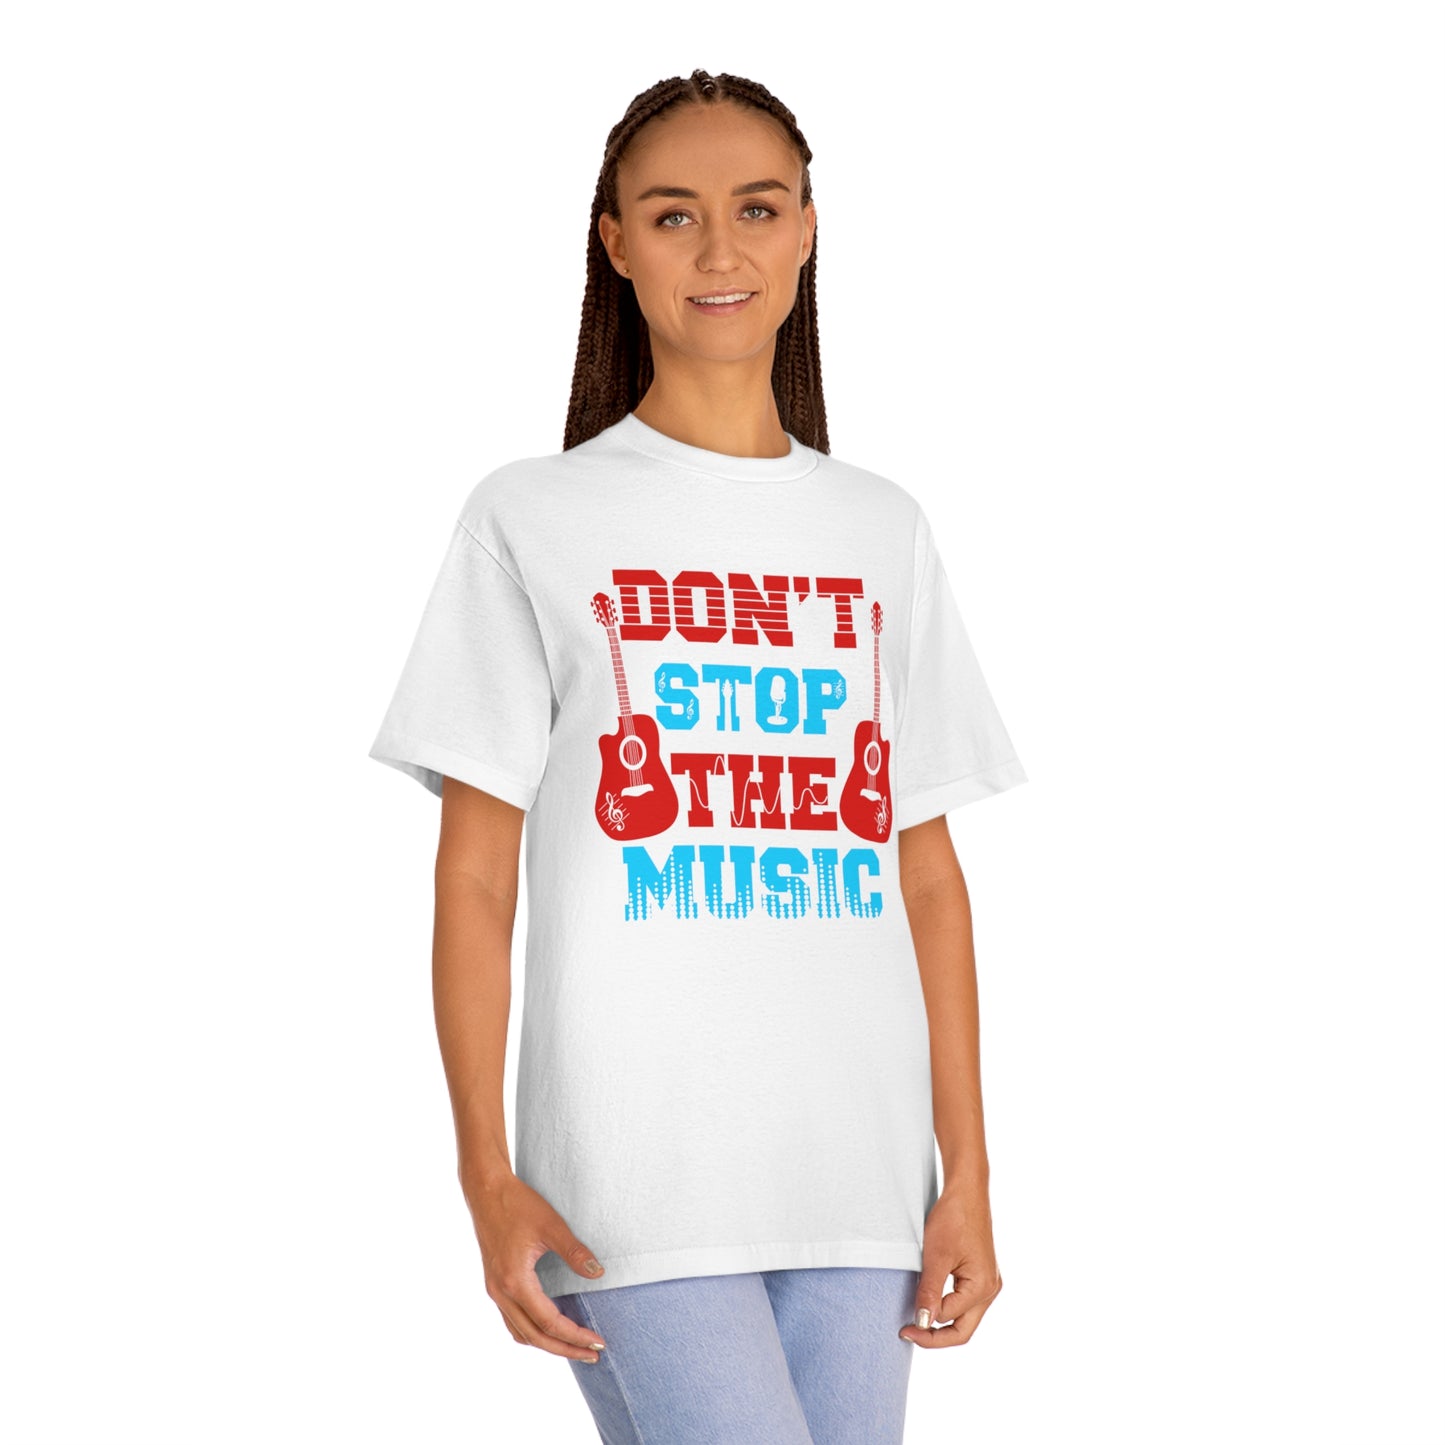 Don't stop the music Unisex Classic Tee